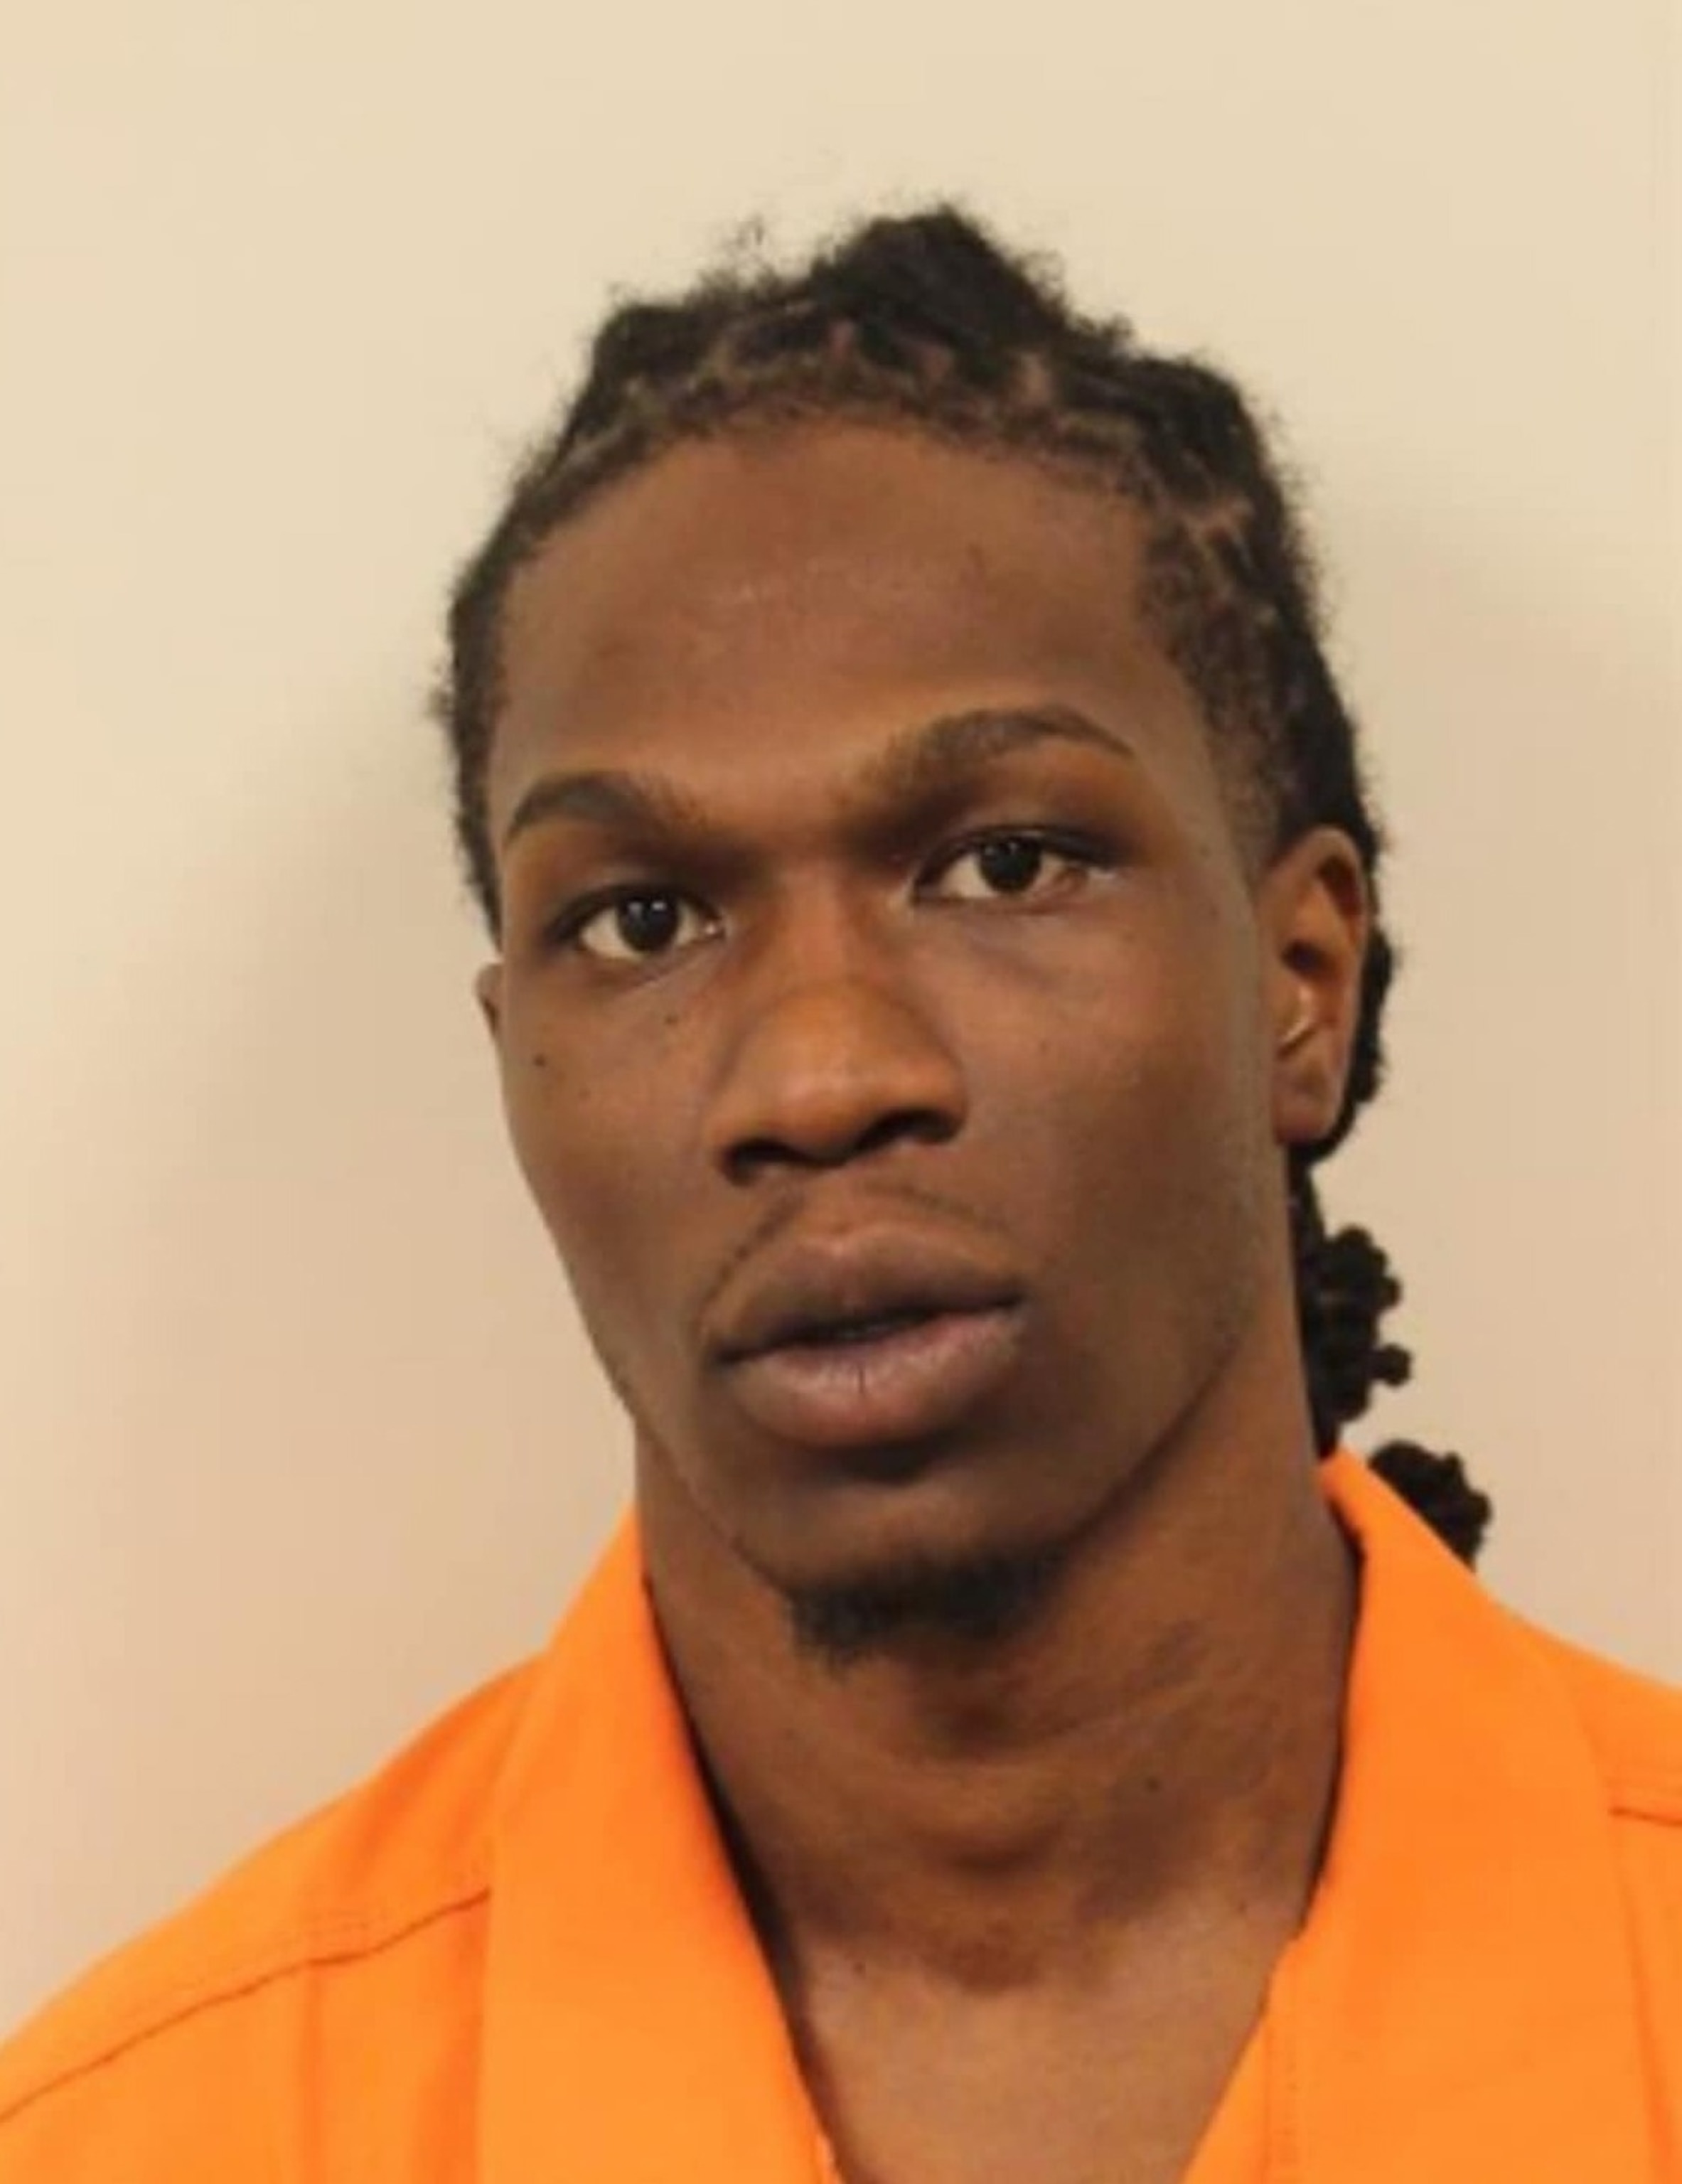 PHOTO: Dejan Belnavis, 27, was arrested on charges of armed assault to murder and carrying a firearm without a license, police said.